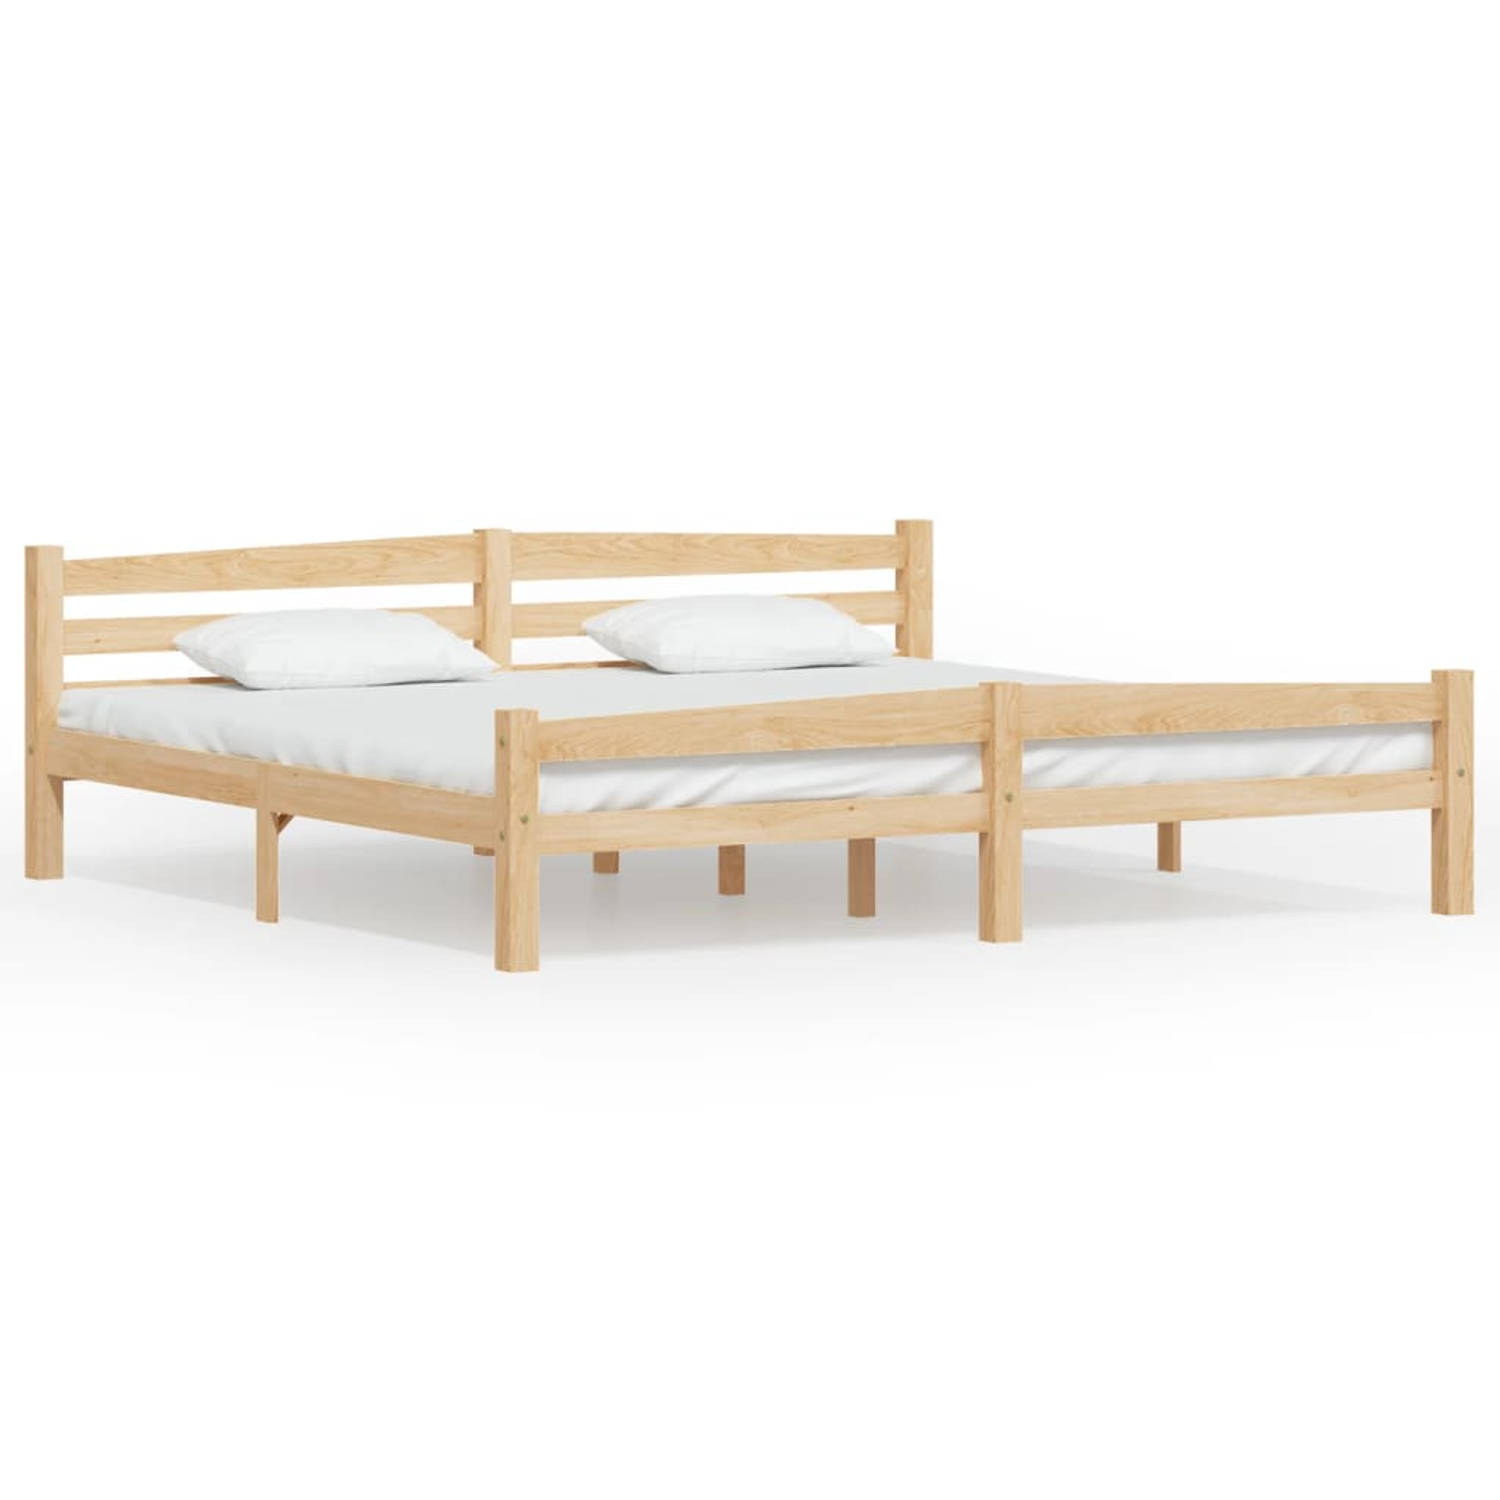 The Living Store Bedframe massief grenenhout 200x200 cm - Bedframe - Bedframe - Bed Frame - Bed Frames - Bed - Bedden - 2-persoonsbed - 2-persoonsbedden - Tweepersoons Bed